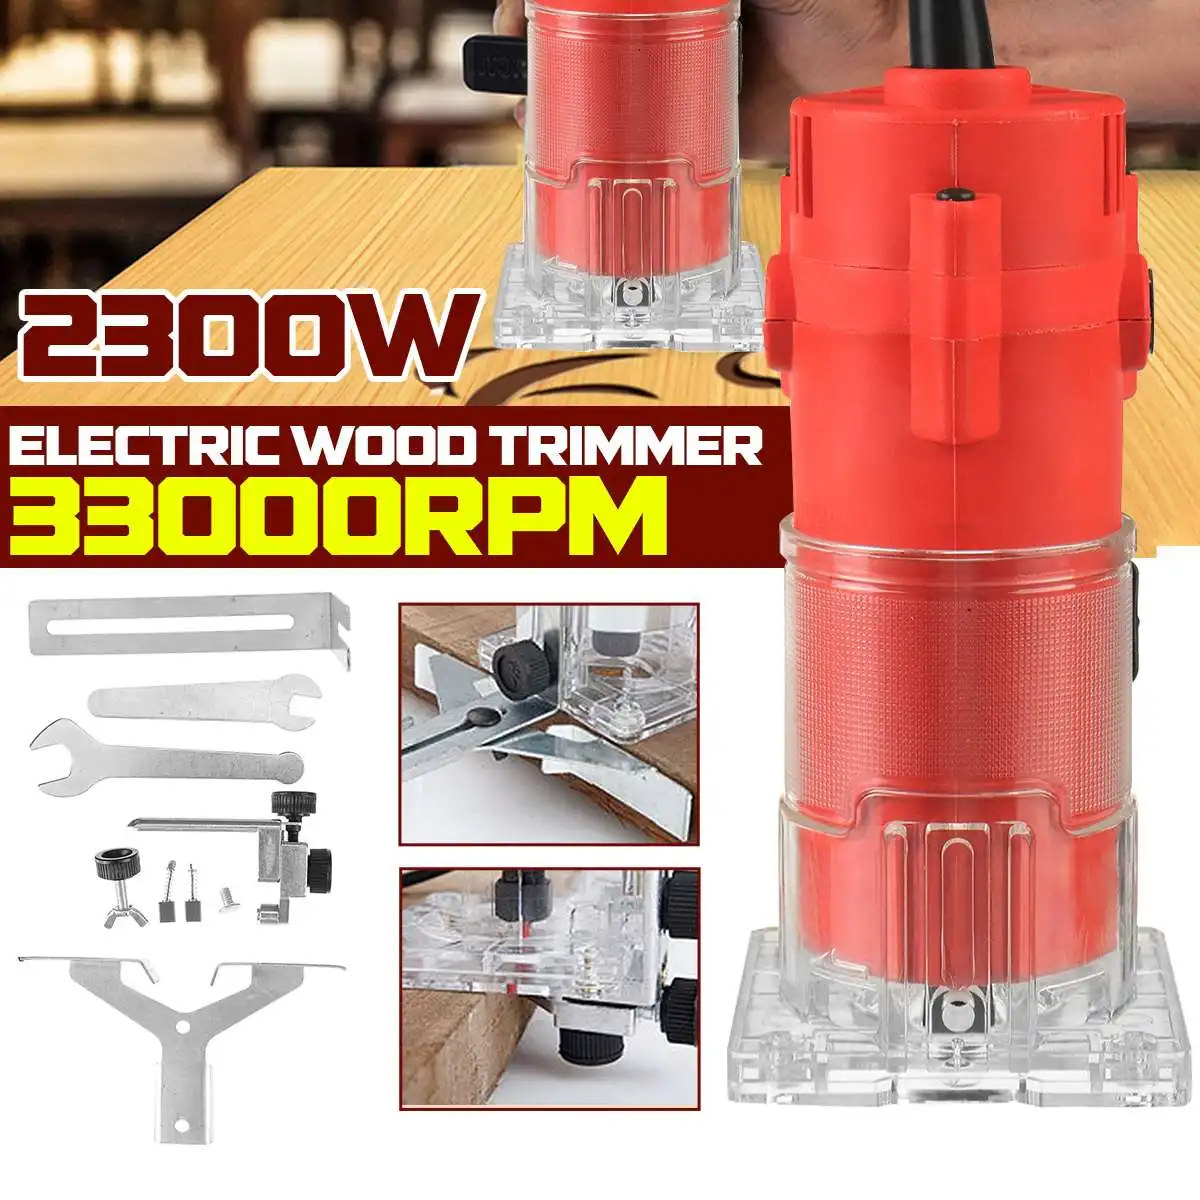 

110V/220V Wood Electric Trimmer 1280W 35000Rpm Wood Laminate Palm Router Electric Hand Trimmer Edge Joiners Woodworking Tool